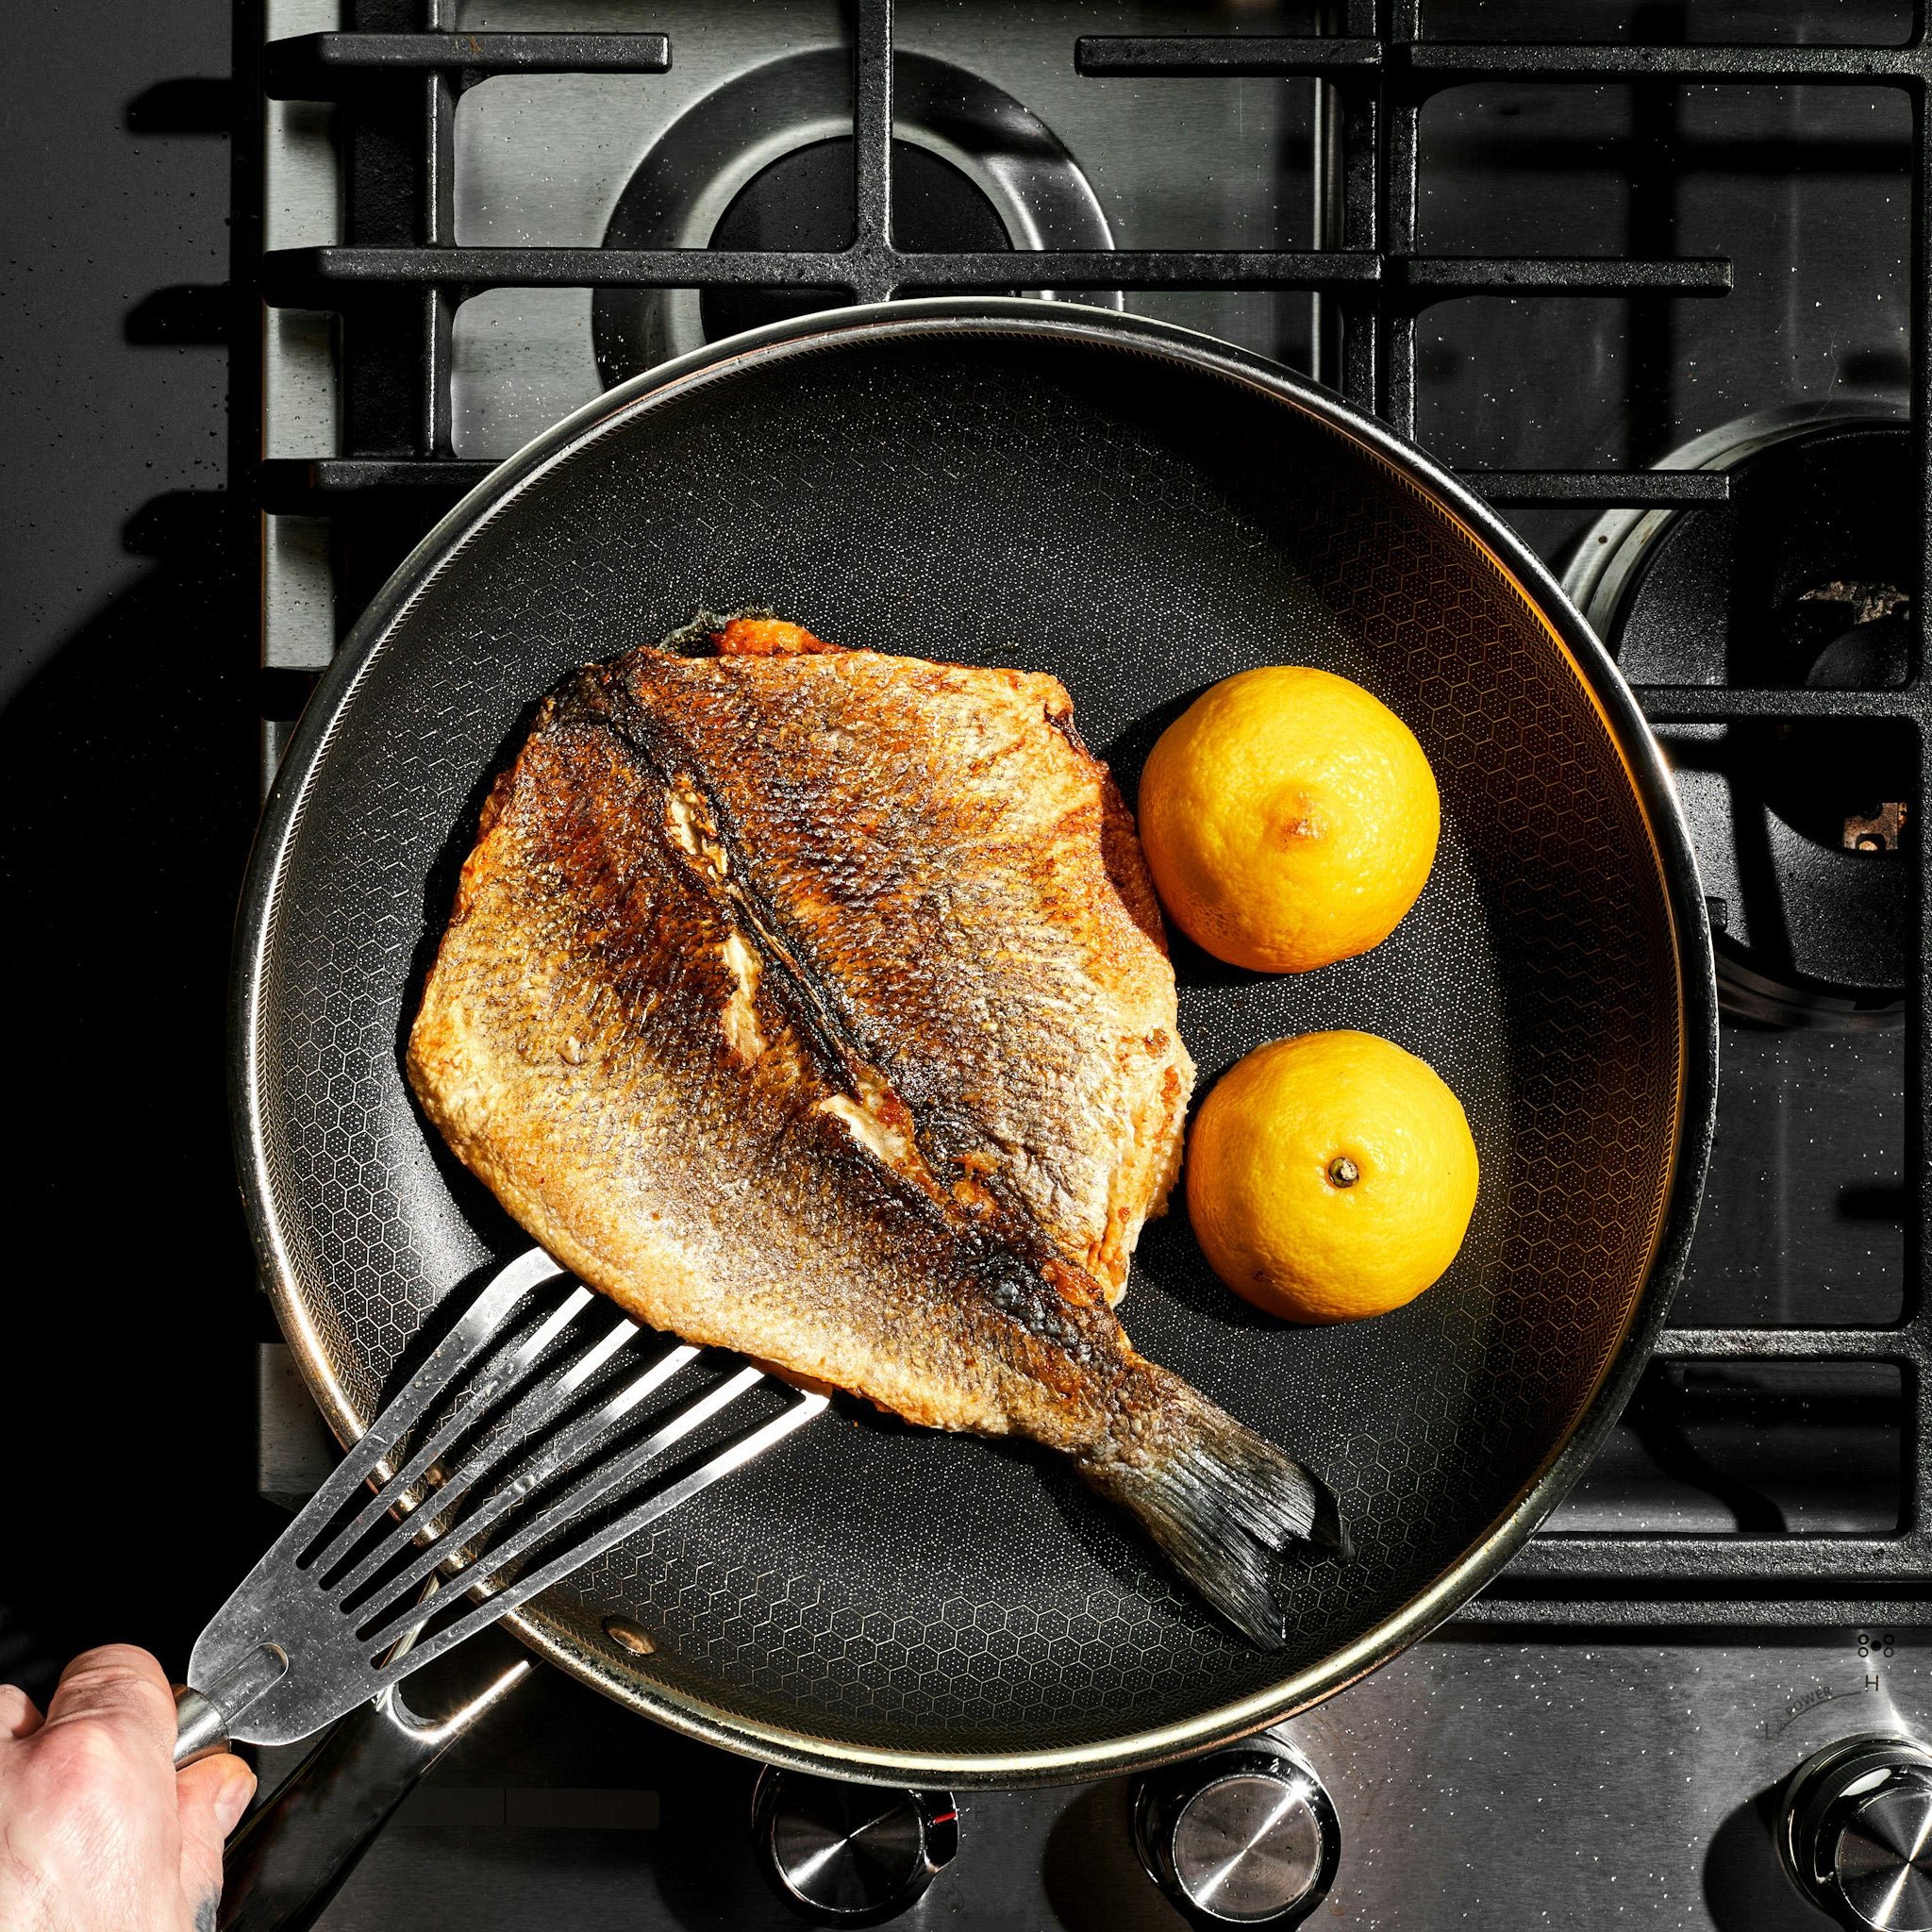 Fish fillet and lemons cooking in a pan on a stovetop.